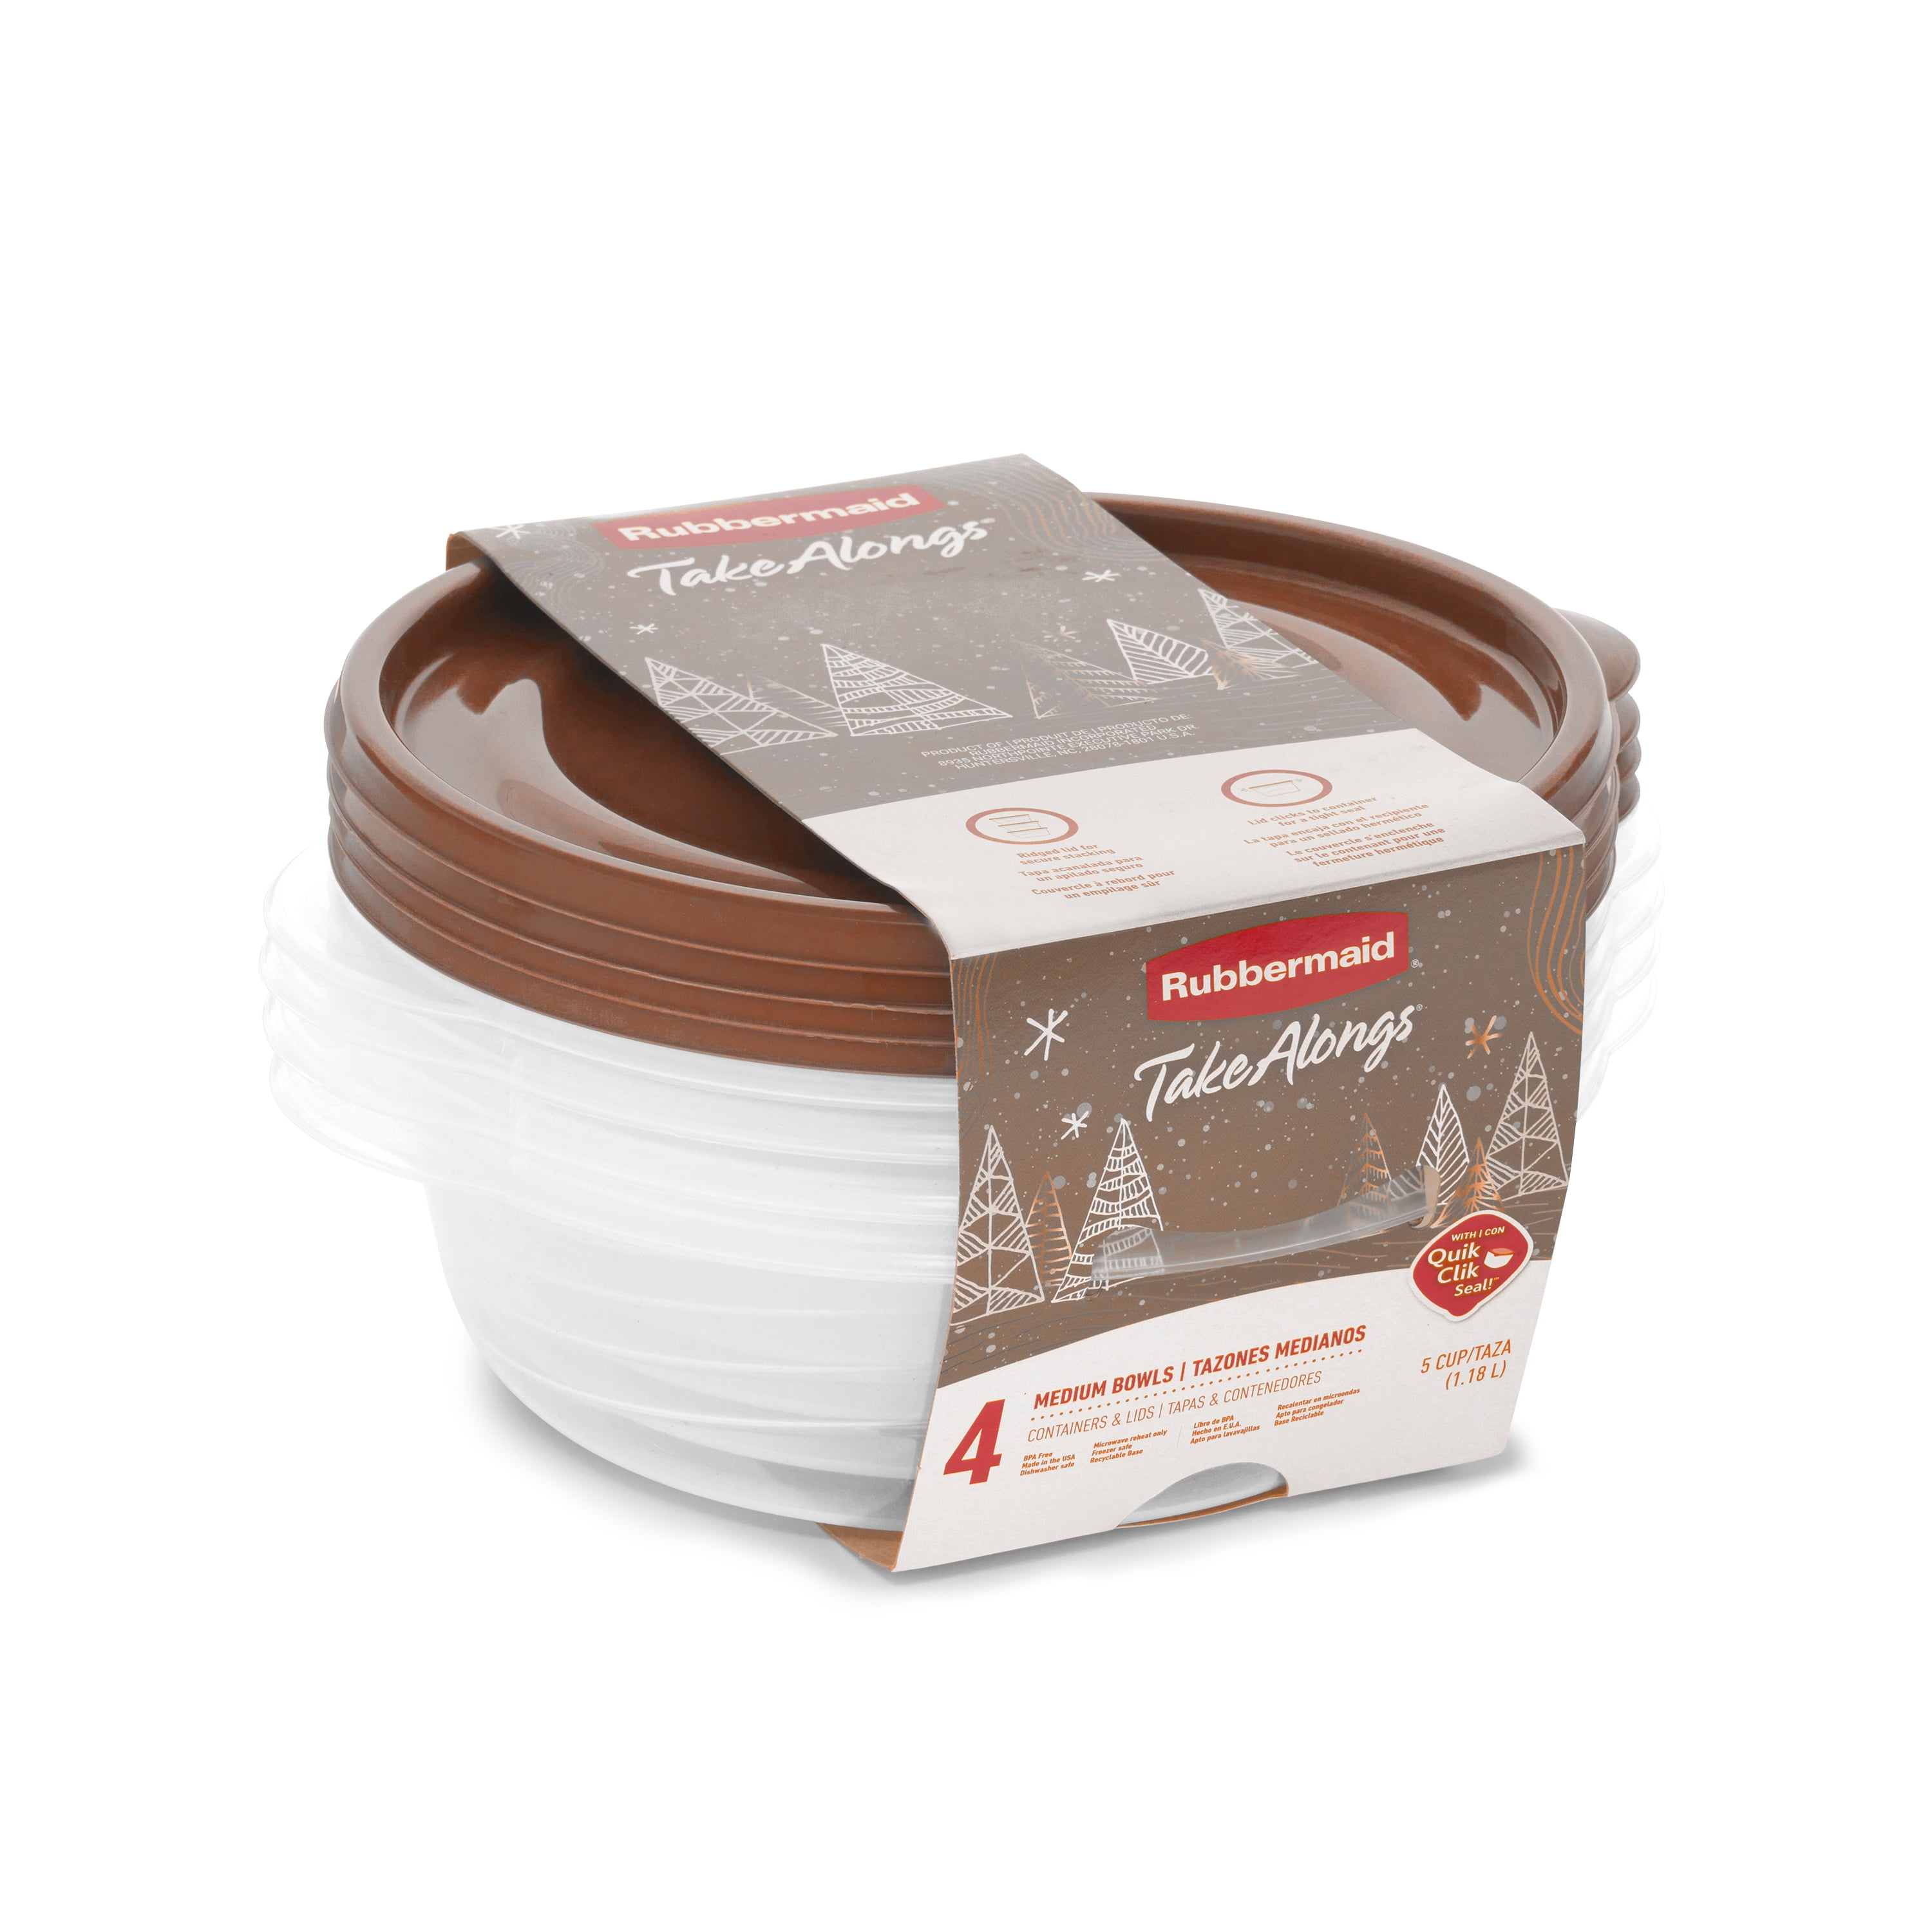 Rubbermaid 2184536 Dry Food Container, 5-Cup - Quantity 1